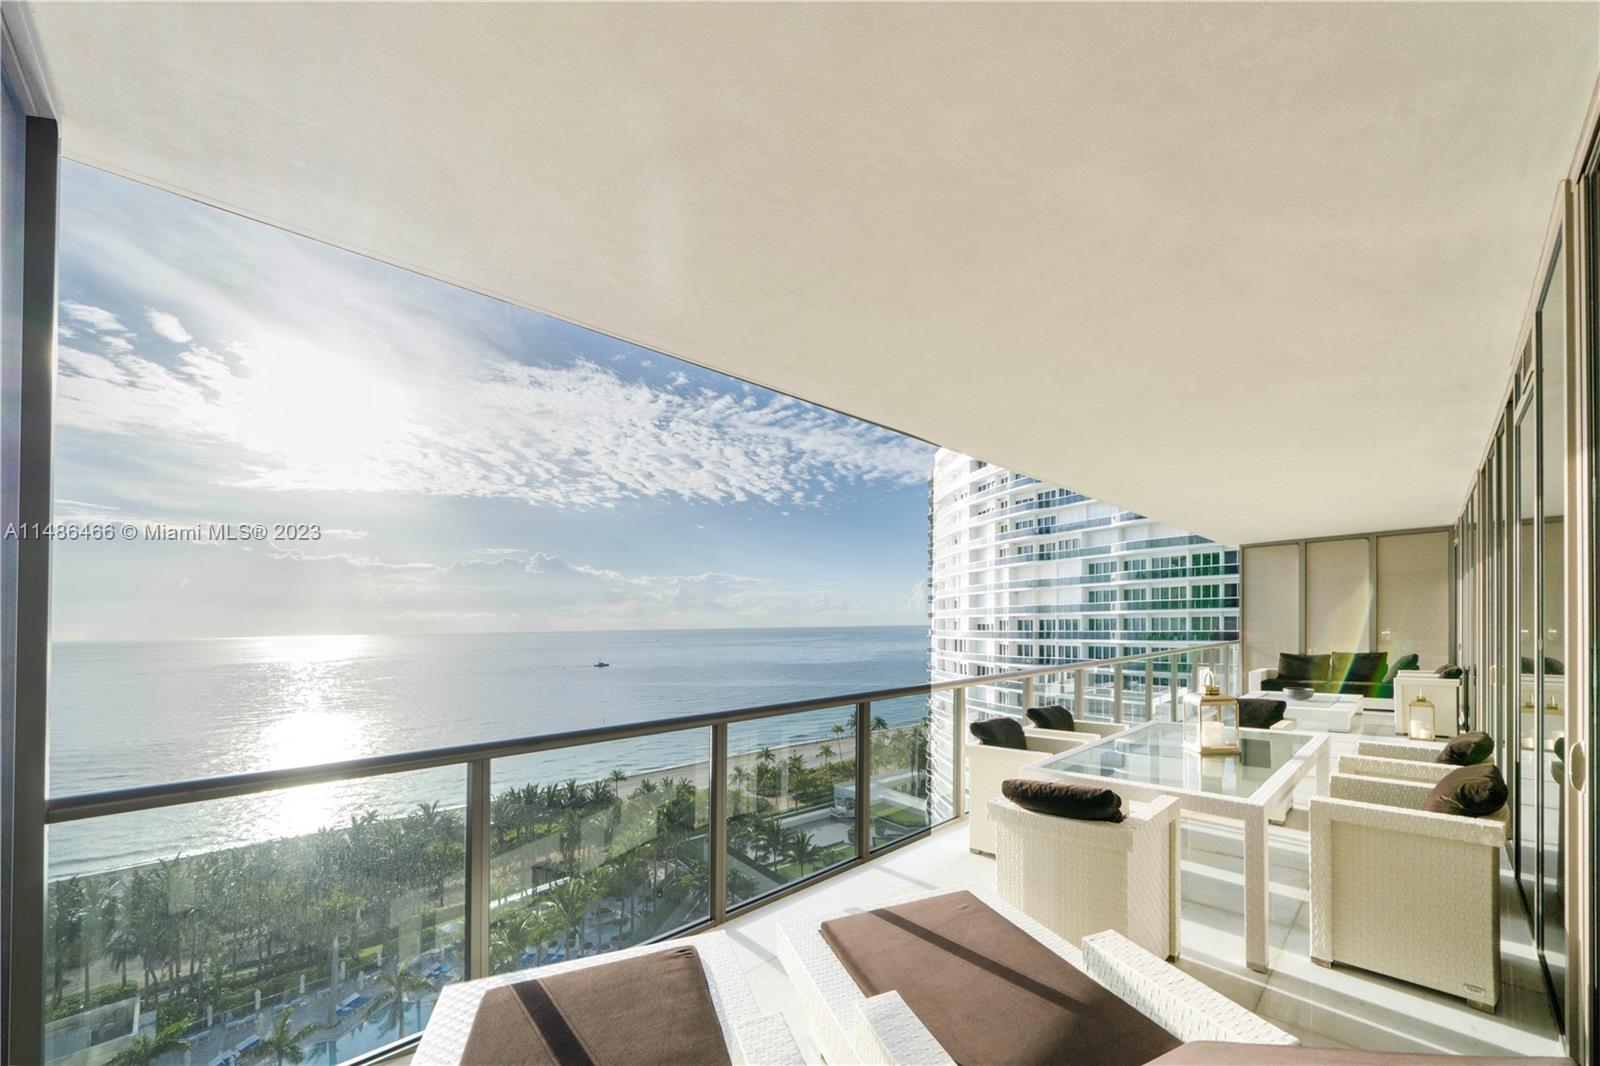 Experience the epitome of luxury oceanfront living at the St. Regis Bal Harbour. Stunning 3BD/4BA fl